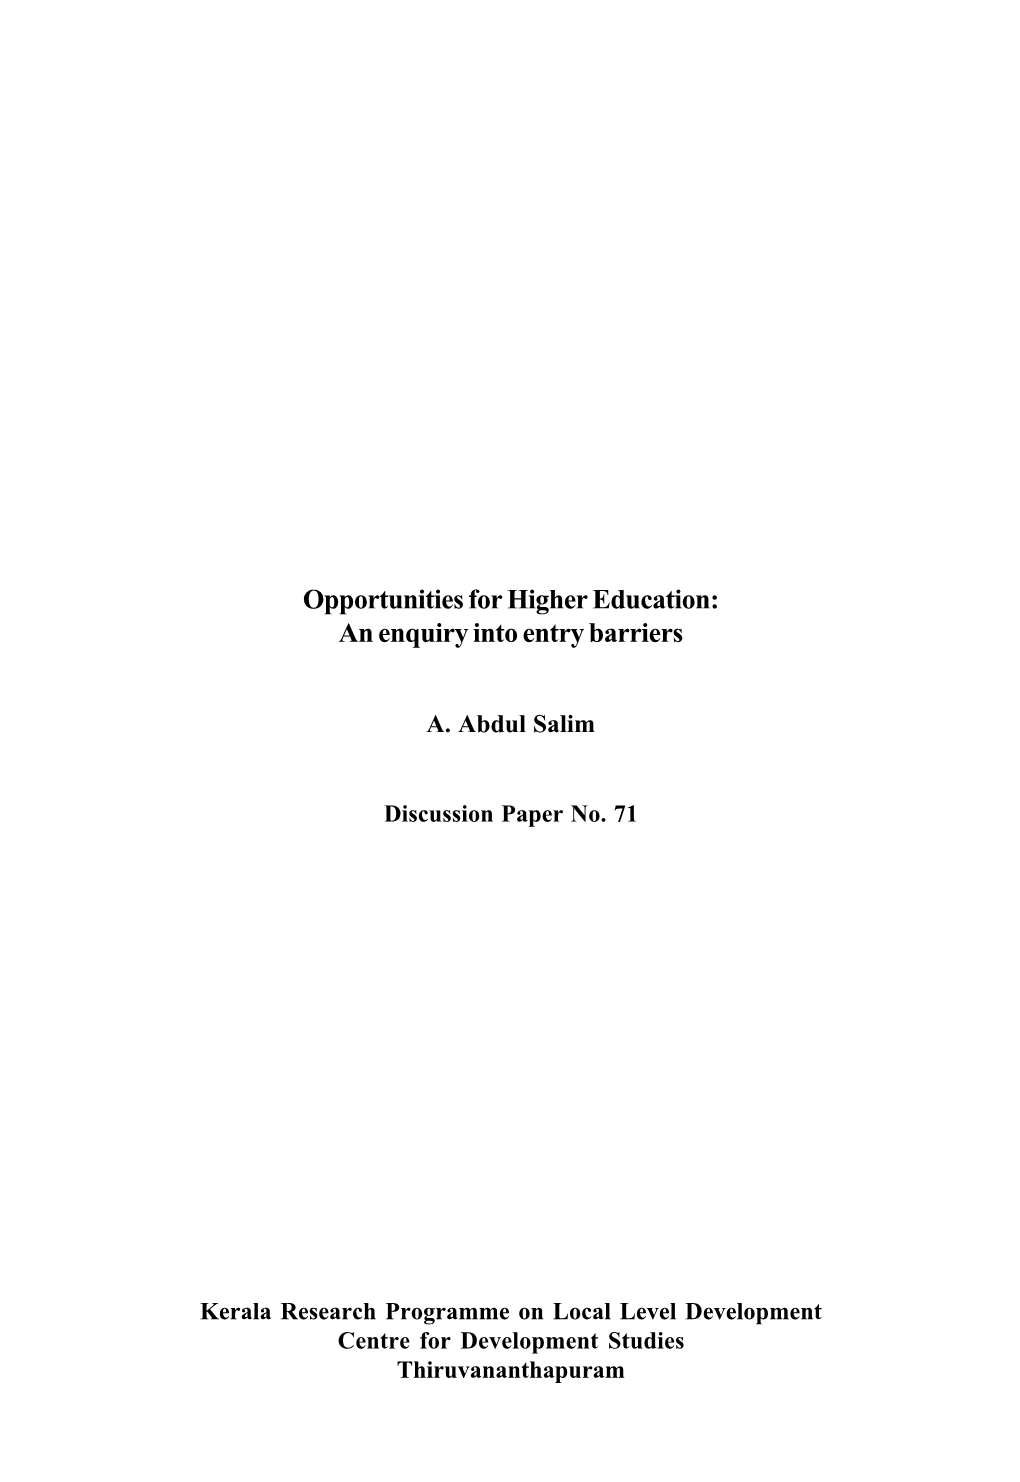 Opportunities for Higher Education: an Enquiry Into Entry Barriers